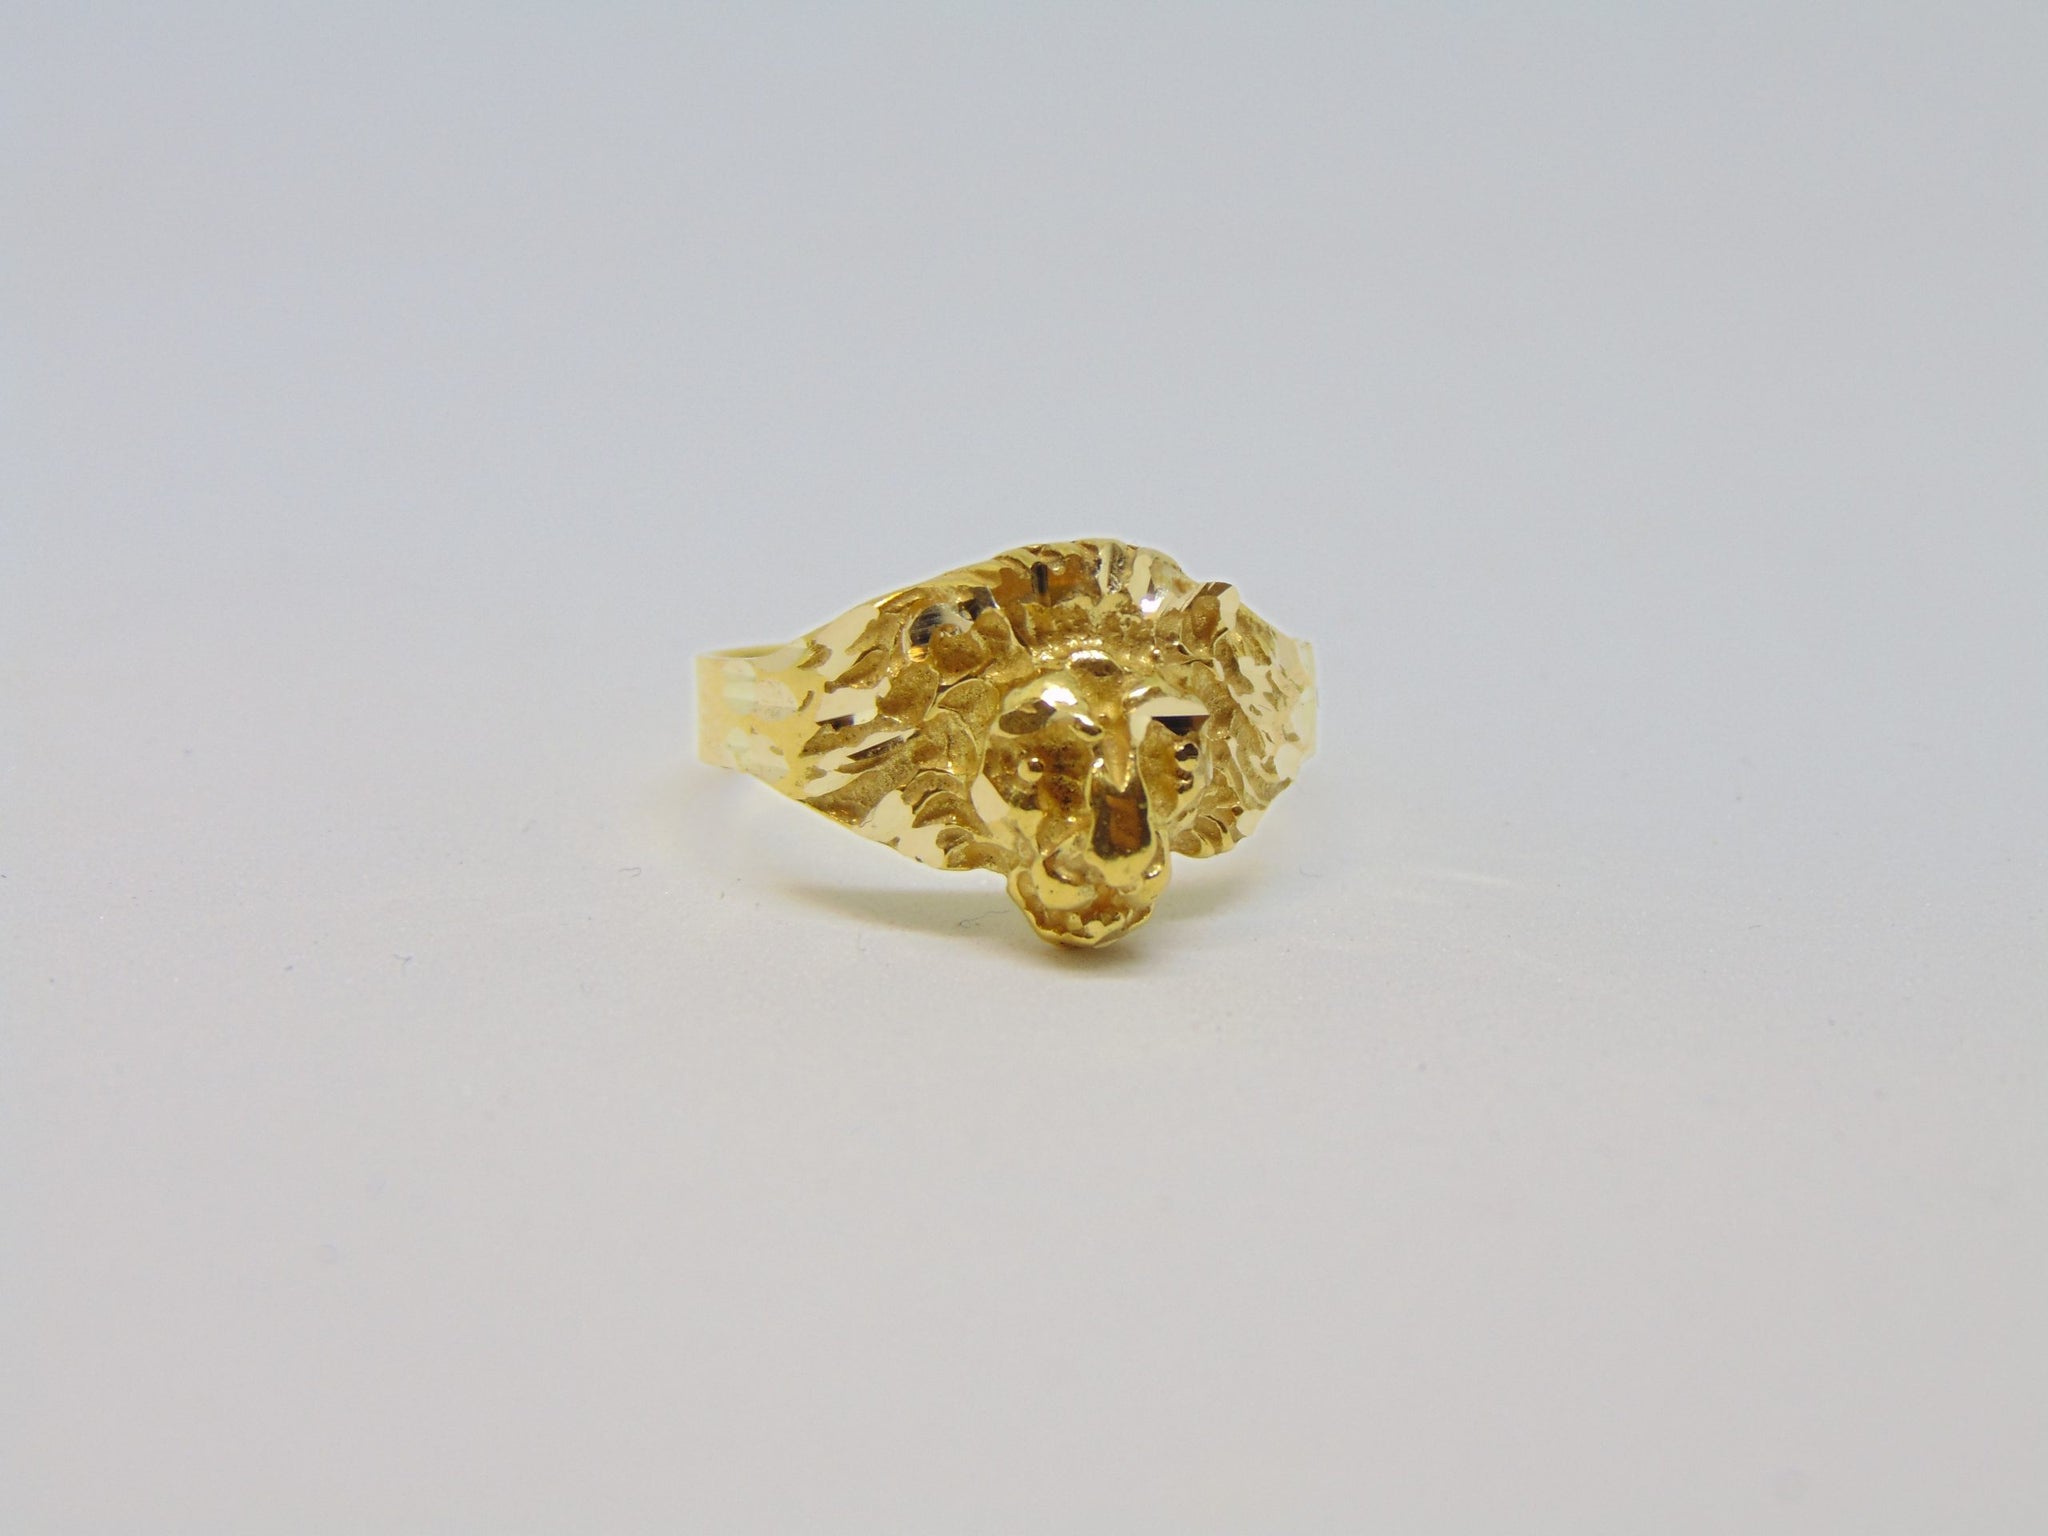 Leeuwenring Zilver - Gold plated 020